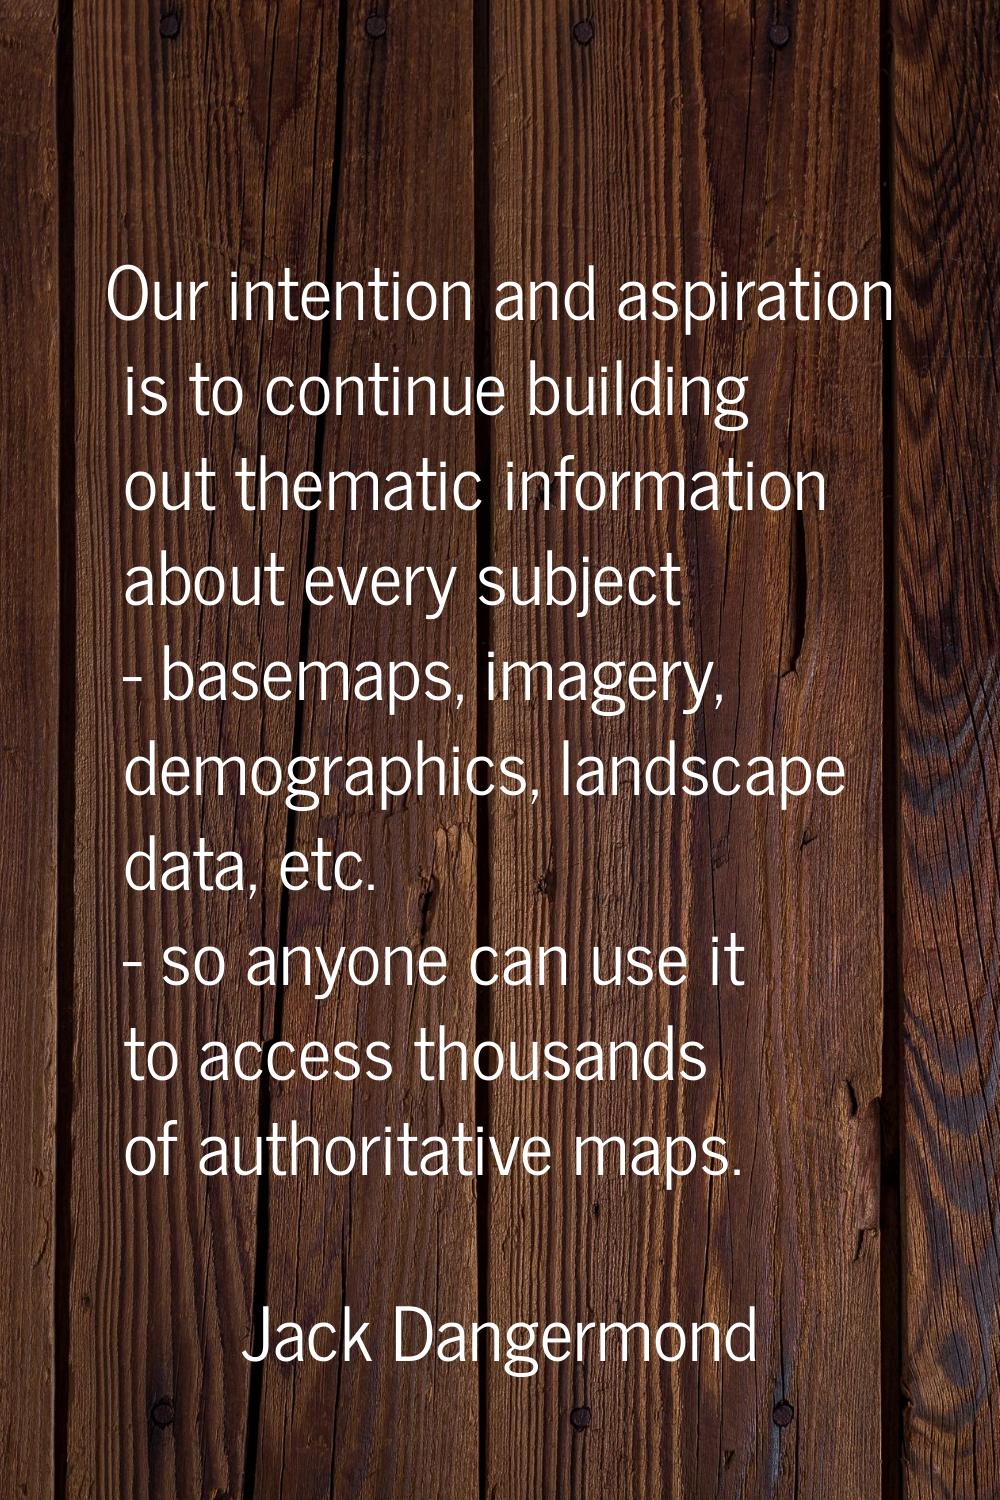 Our intention and aspiration is to continue building out thematic information about every subject -